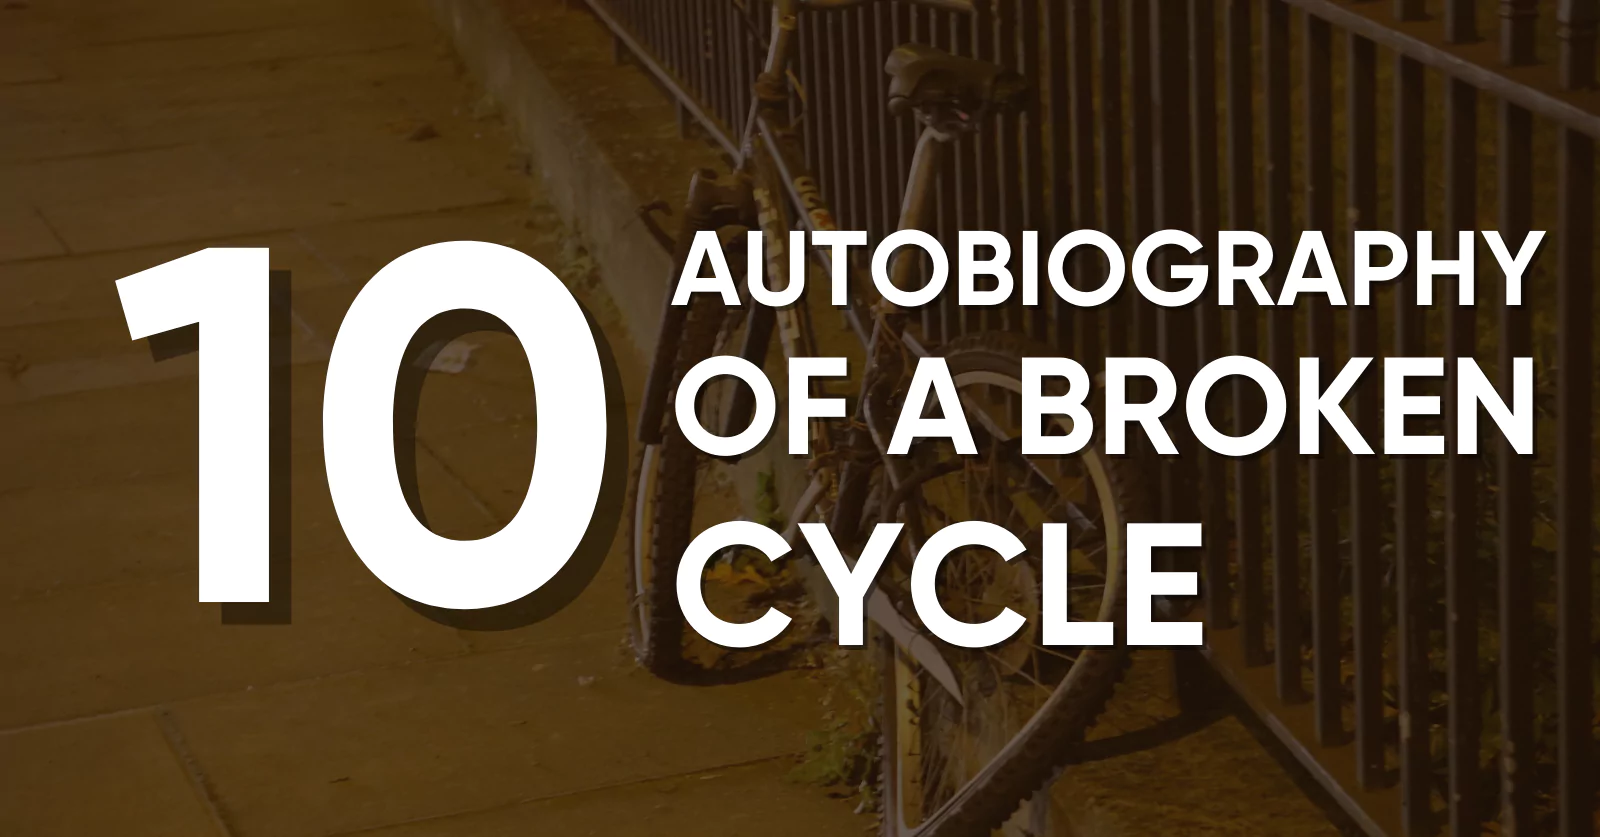 15 autobiography of a broken bicycle